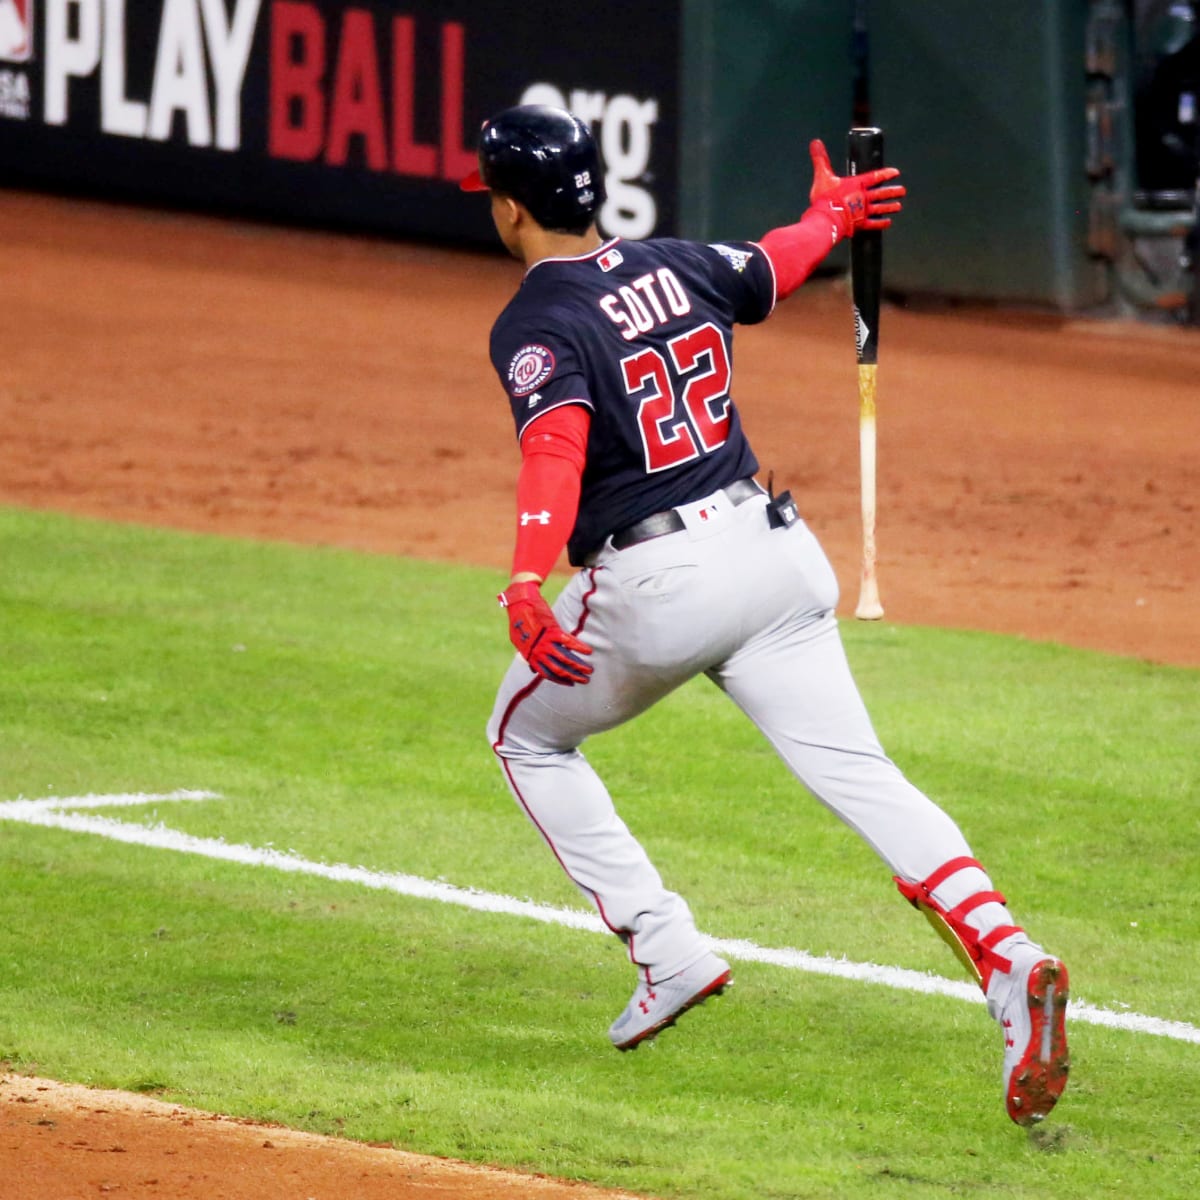 Juan Soto was the Astros' big World Series worry, with good reason